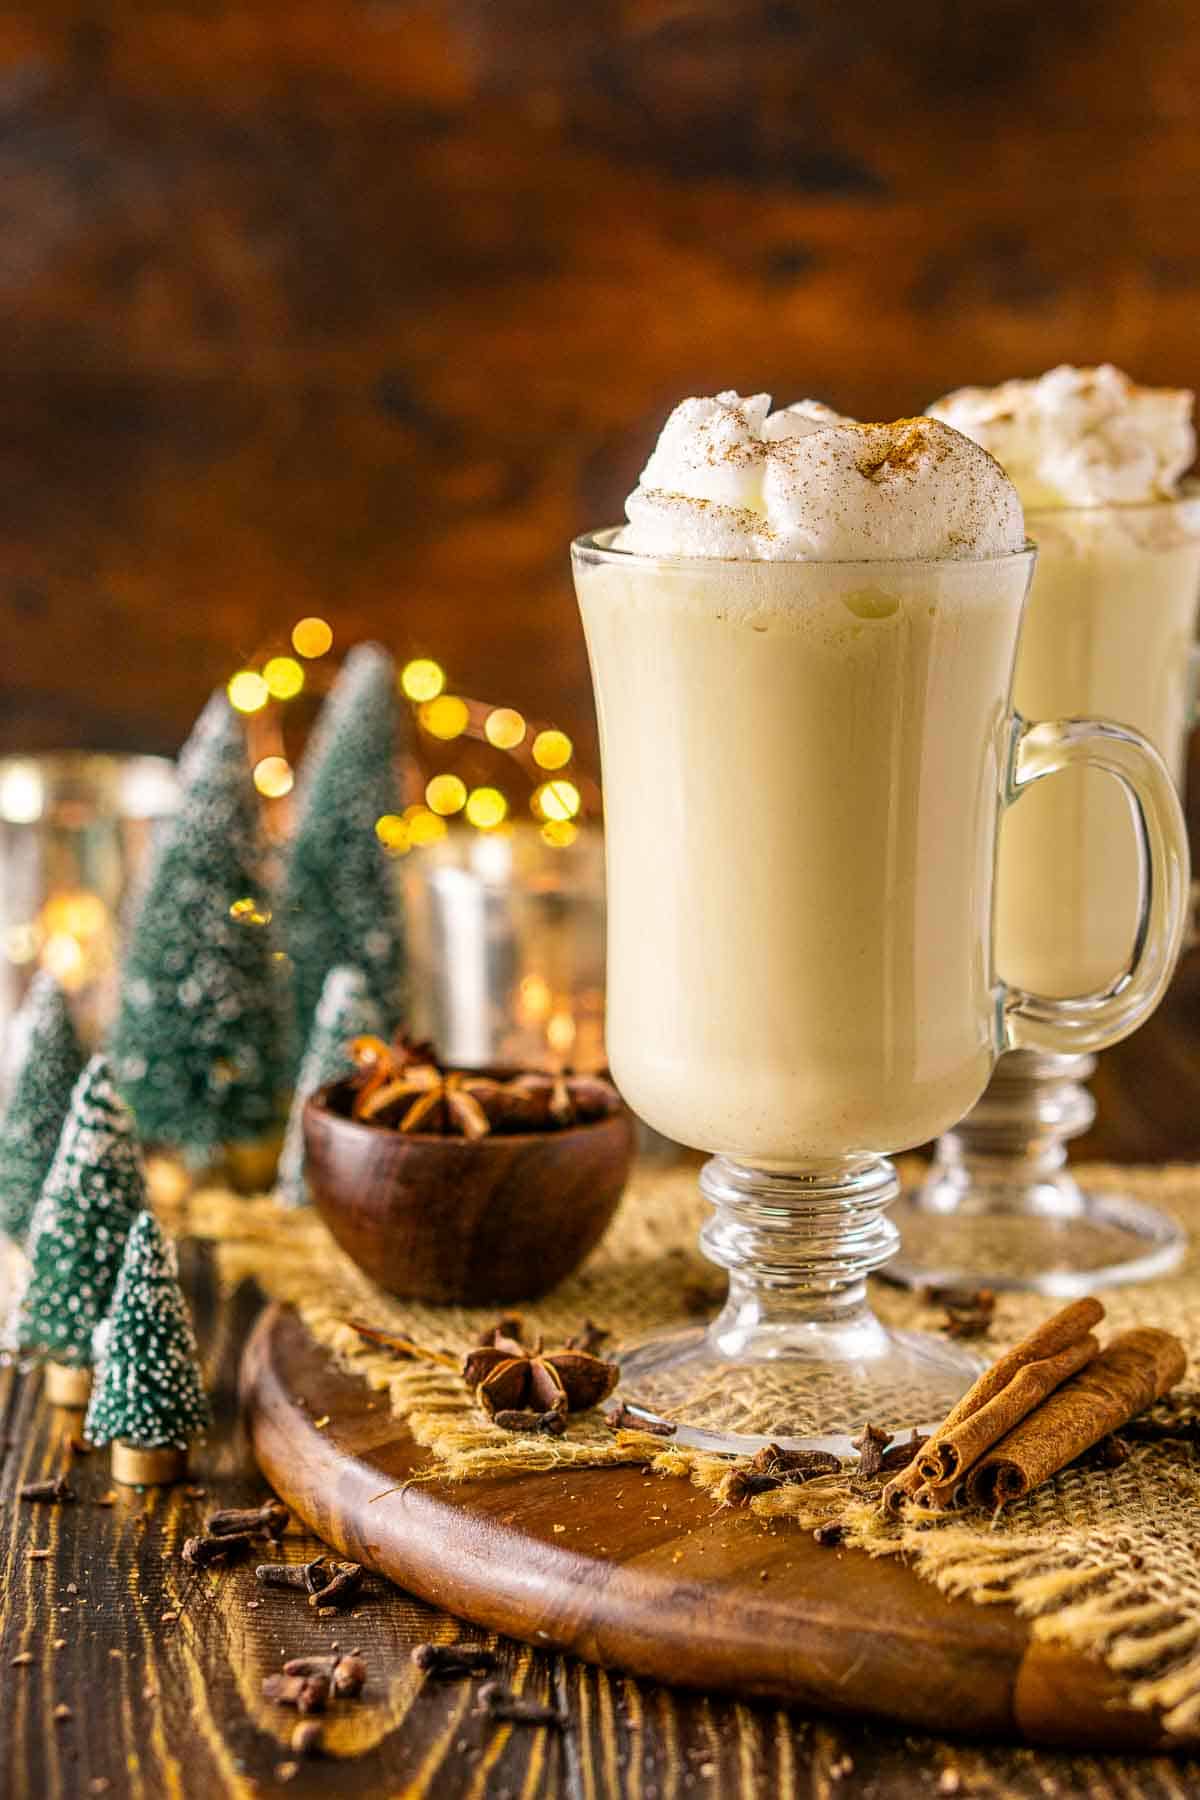 A straight-on view of the bourbon eggnog on a wooden platter with spices and Christmas decor around it against a brown background.